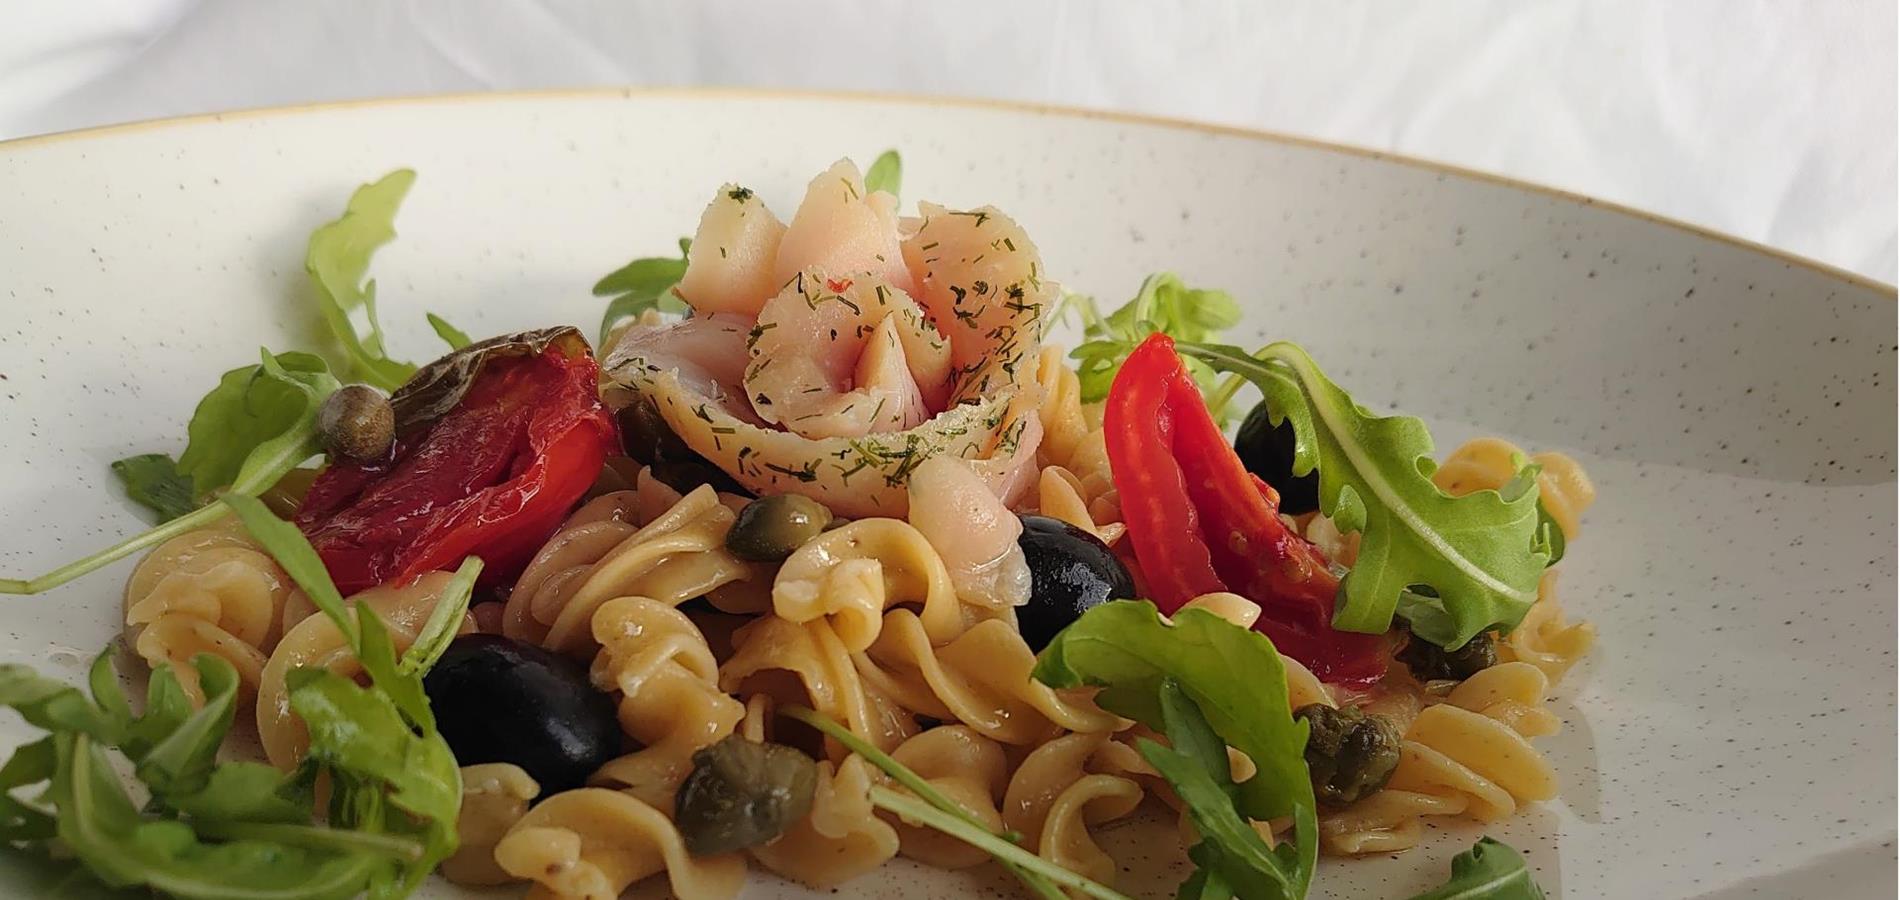 Schüttelbrot fusilli with lightly smoked char, rocket, olives, sun-dried tomatoes and capers